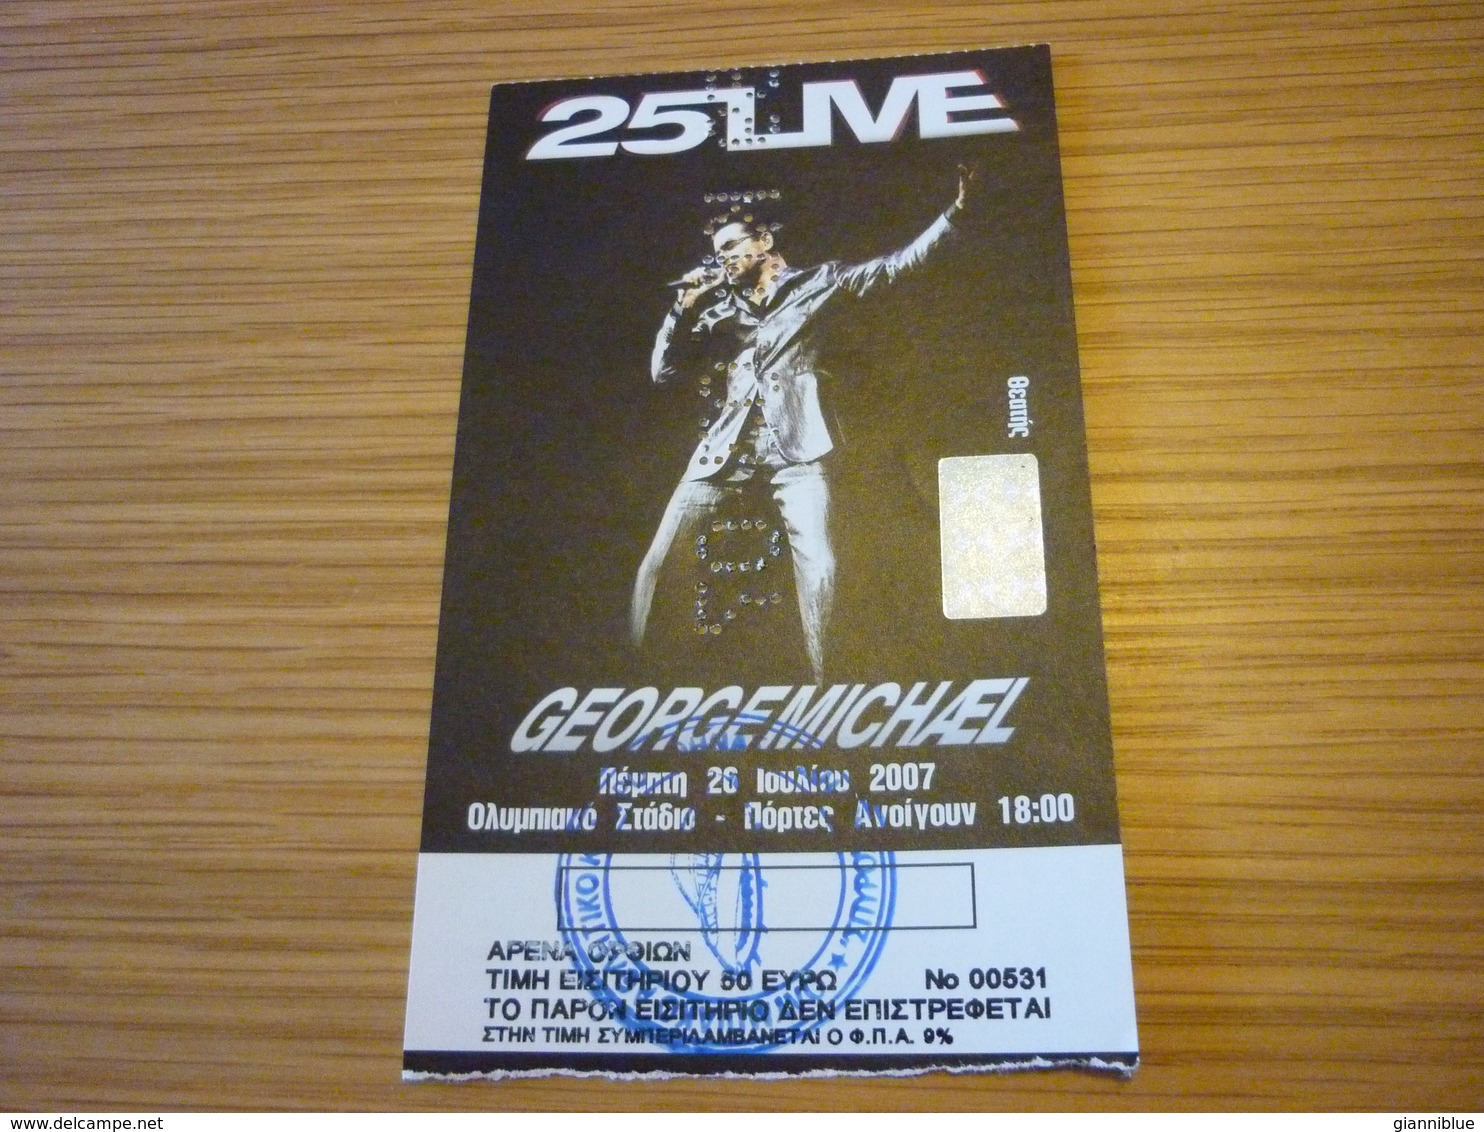 George Michael Ticket D'entree Music Concert In Athens Greece 2007 25 Live Tour - Concert Tickets